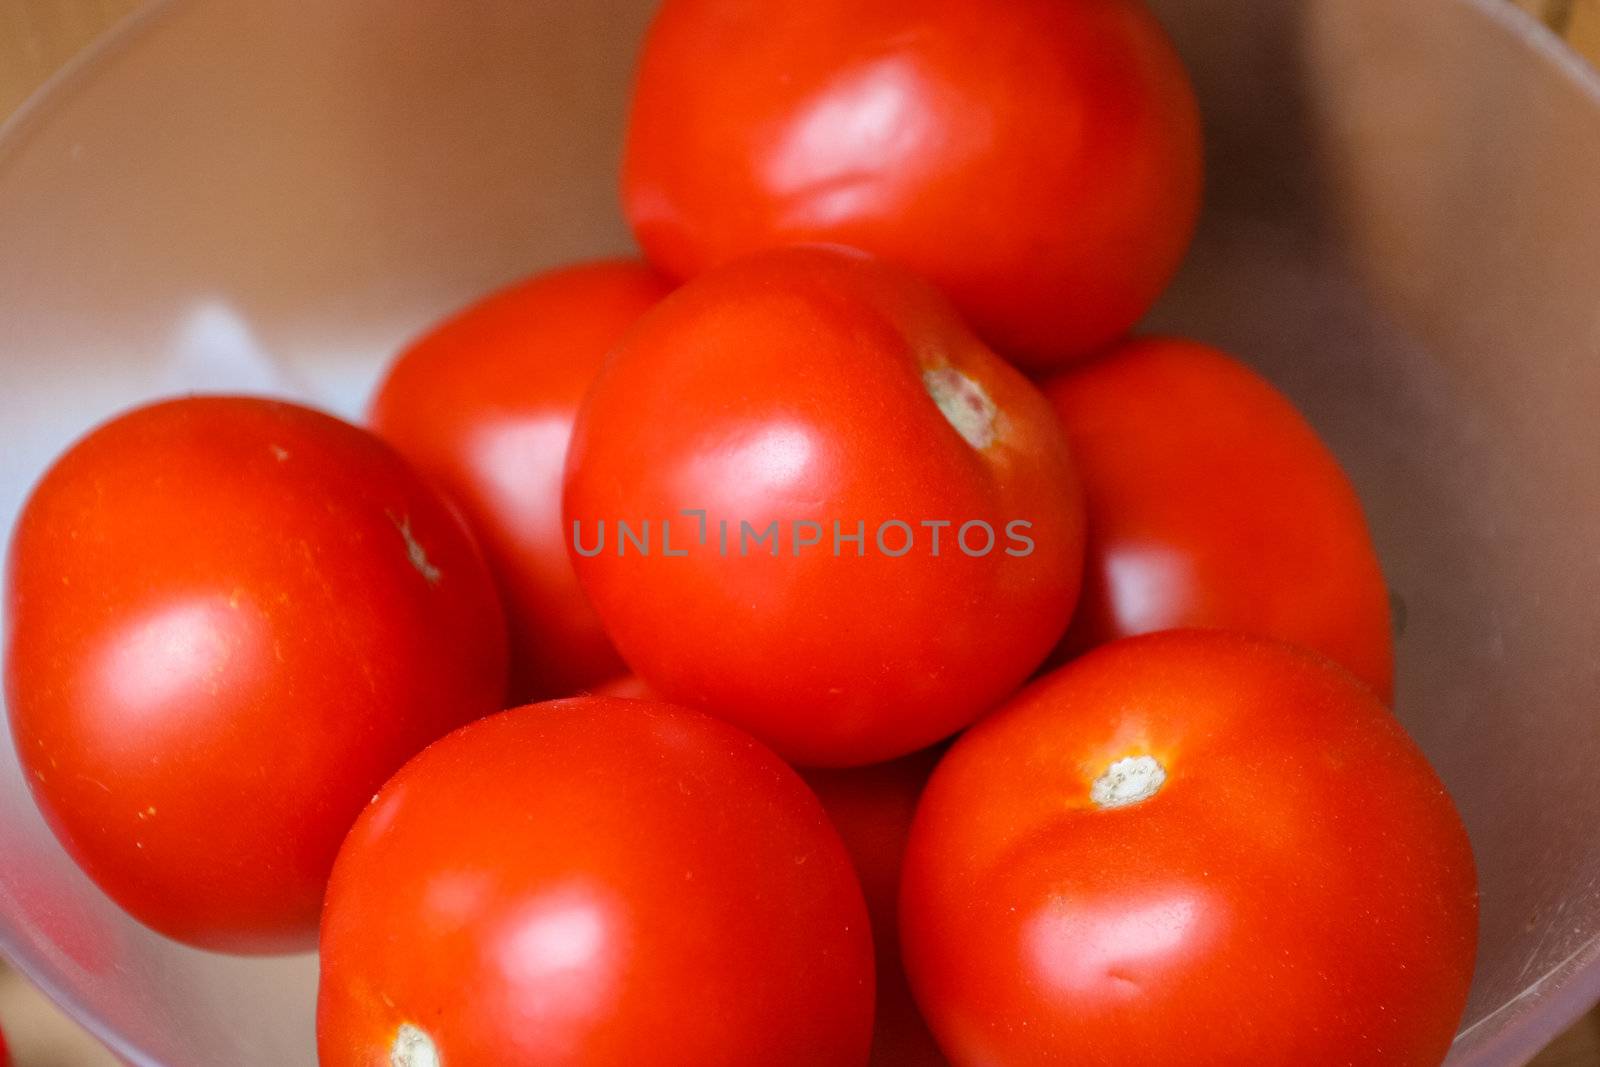 Tomatoes by melastmohican